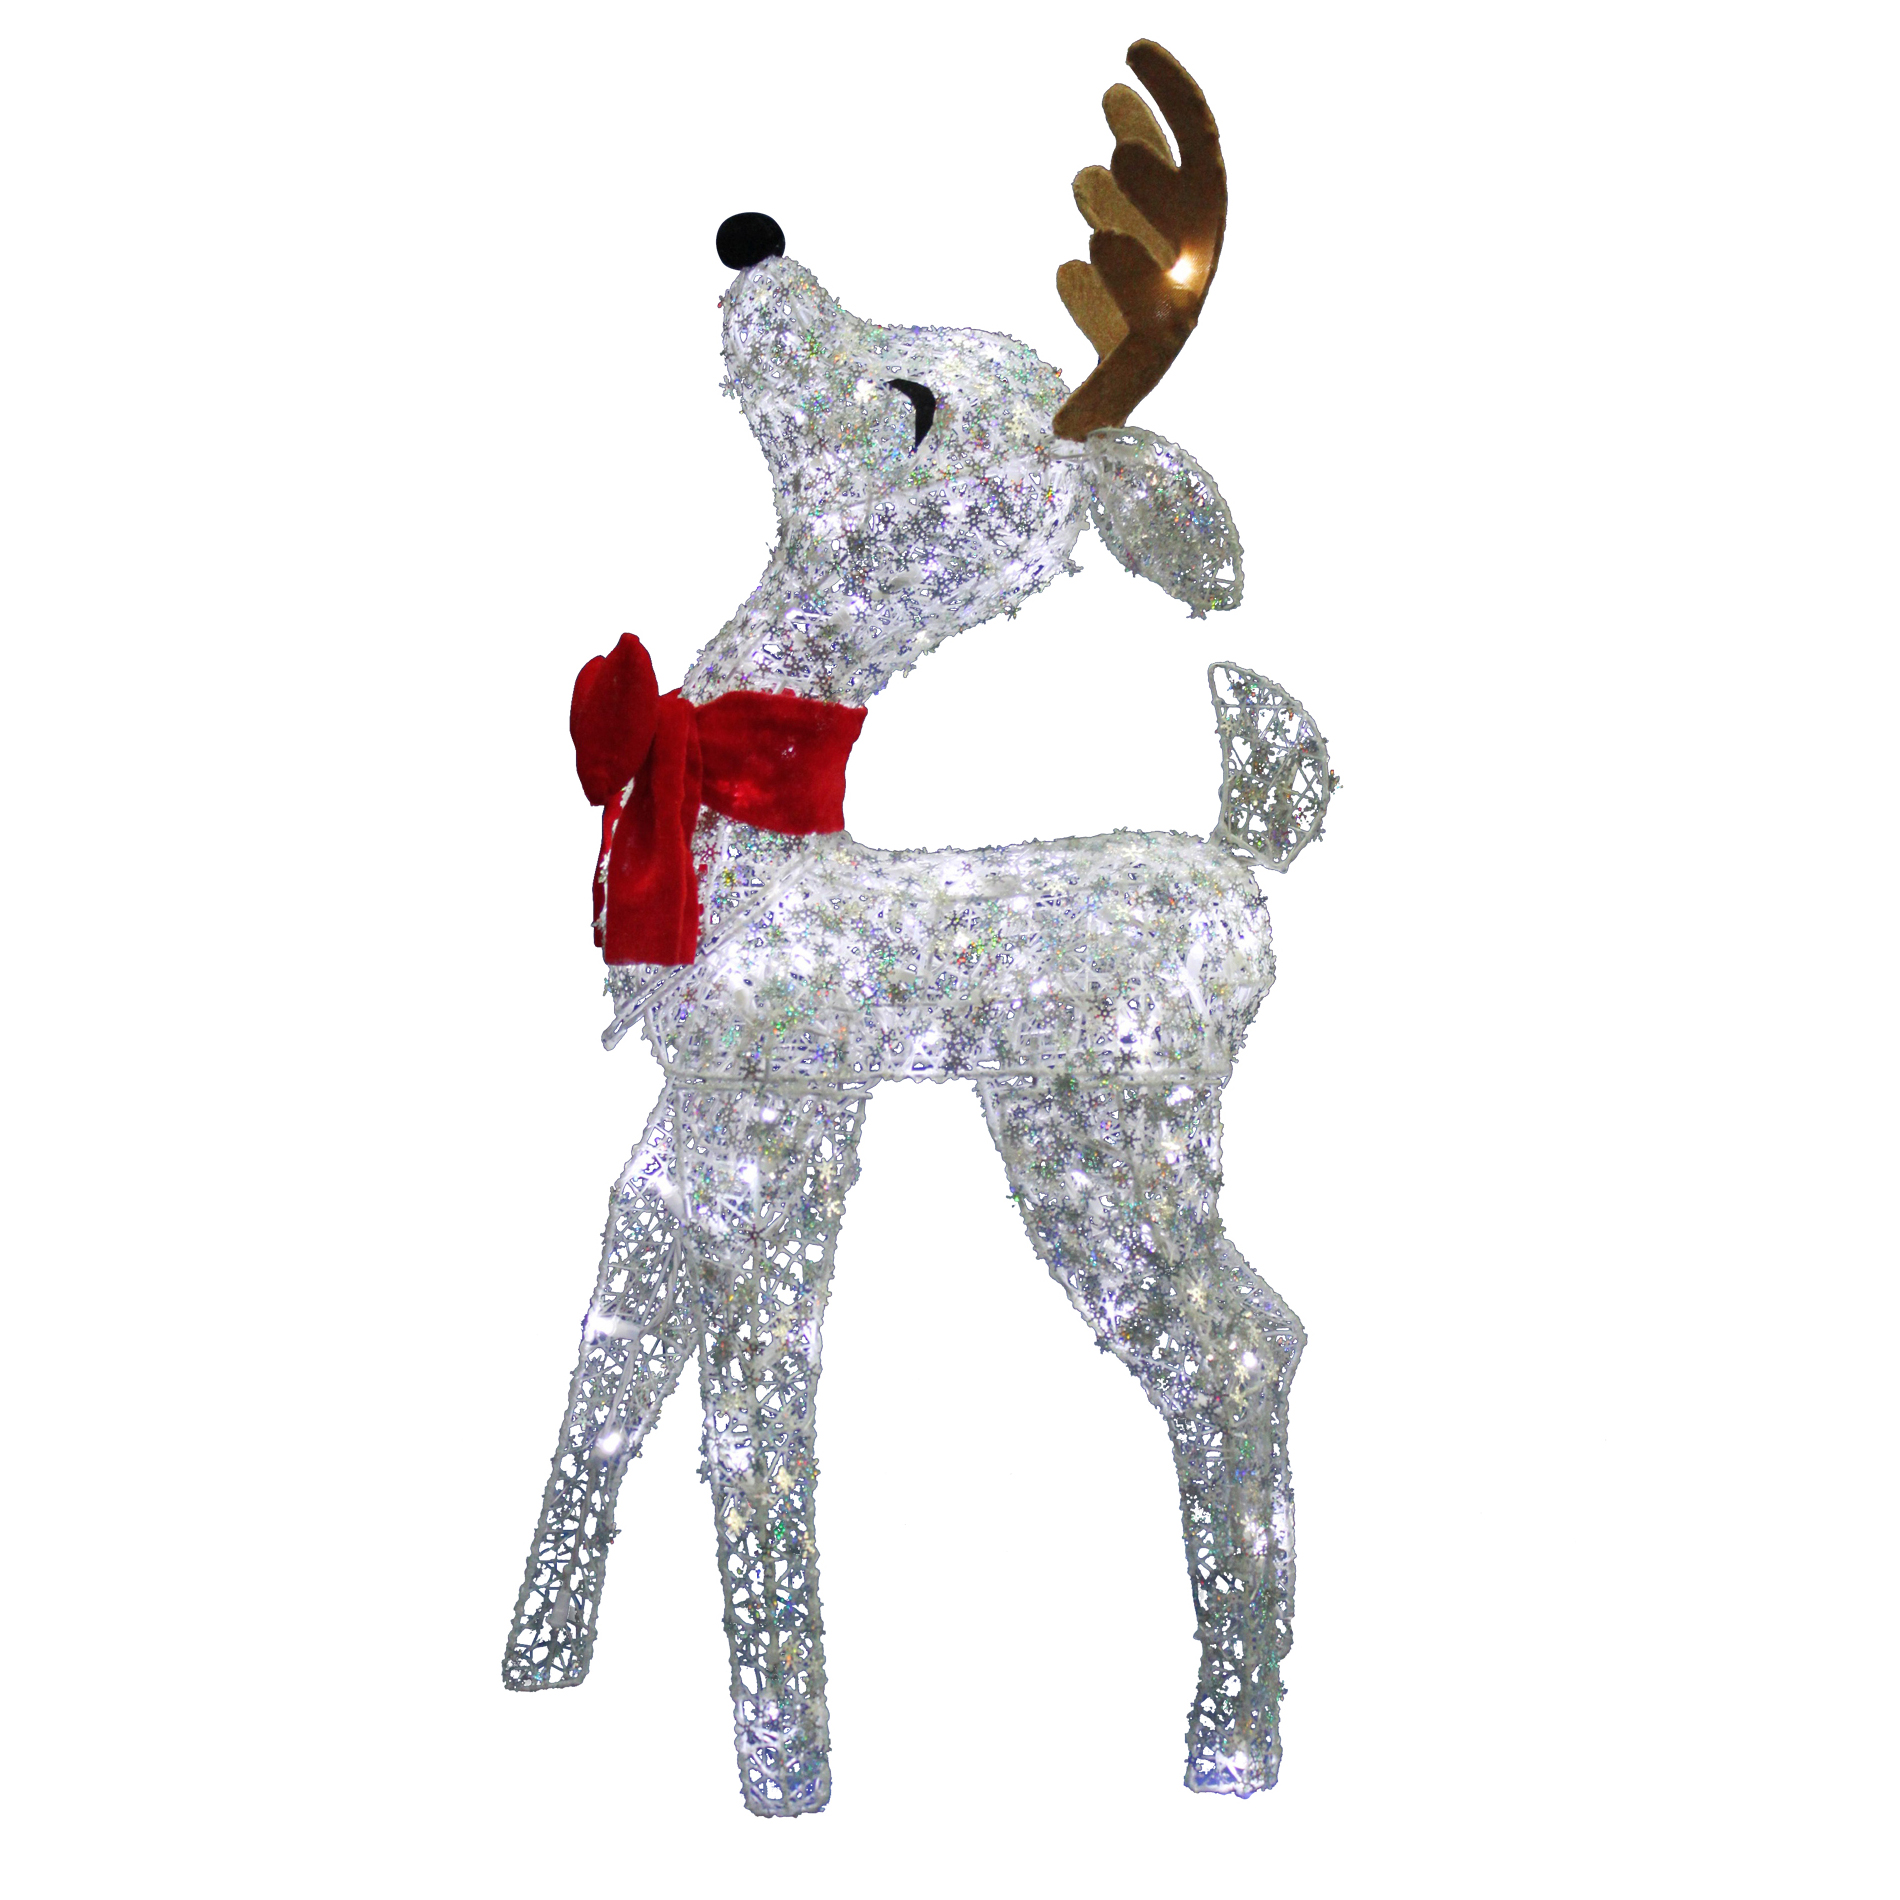 Trimming Traditions 36" Twinkling Deer with 70 White LED Lights